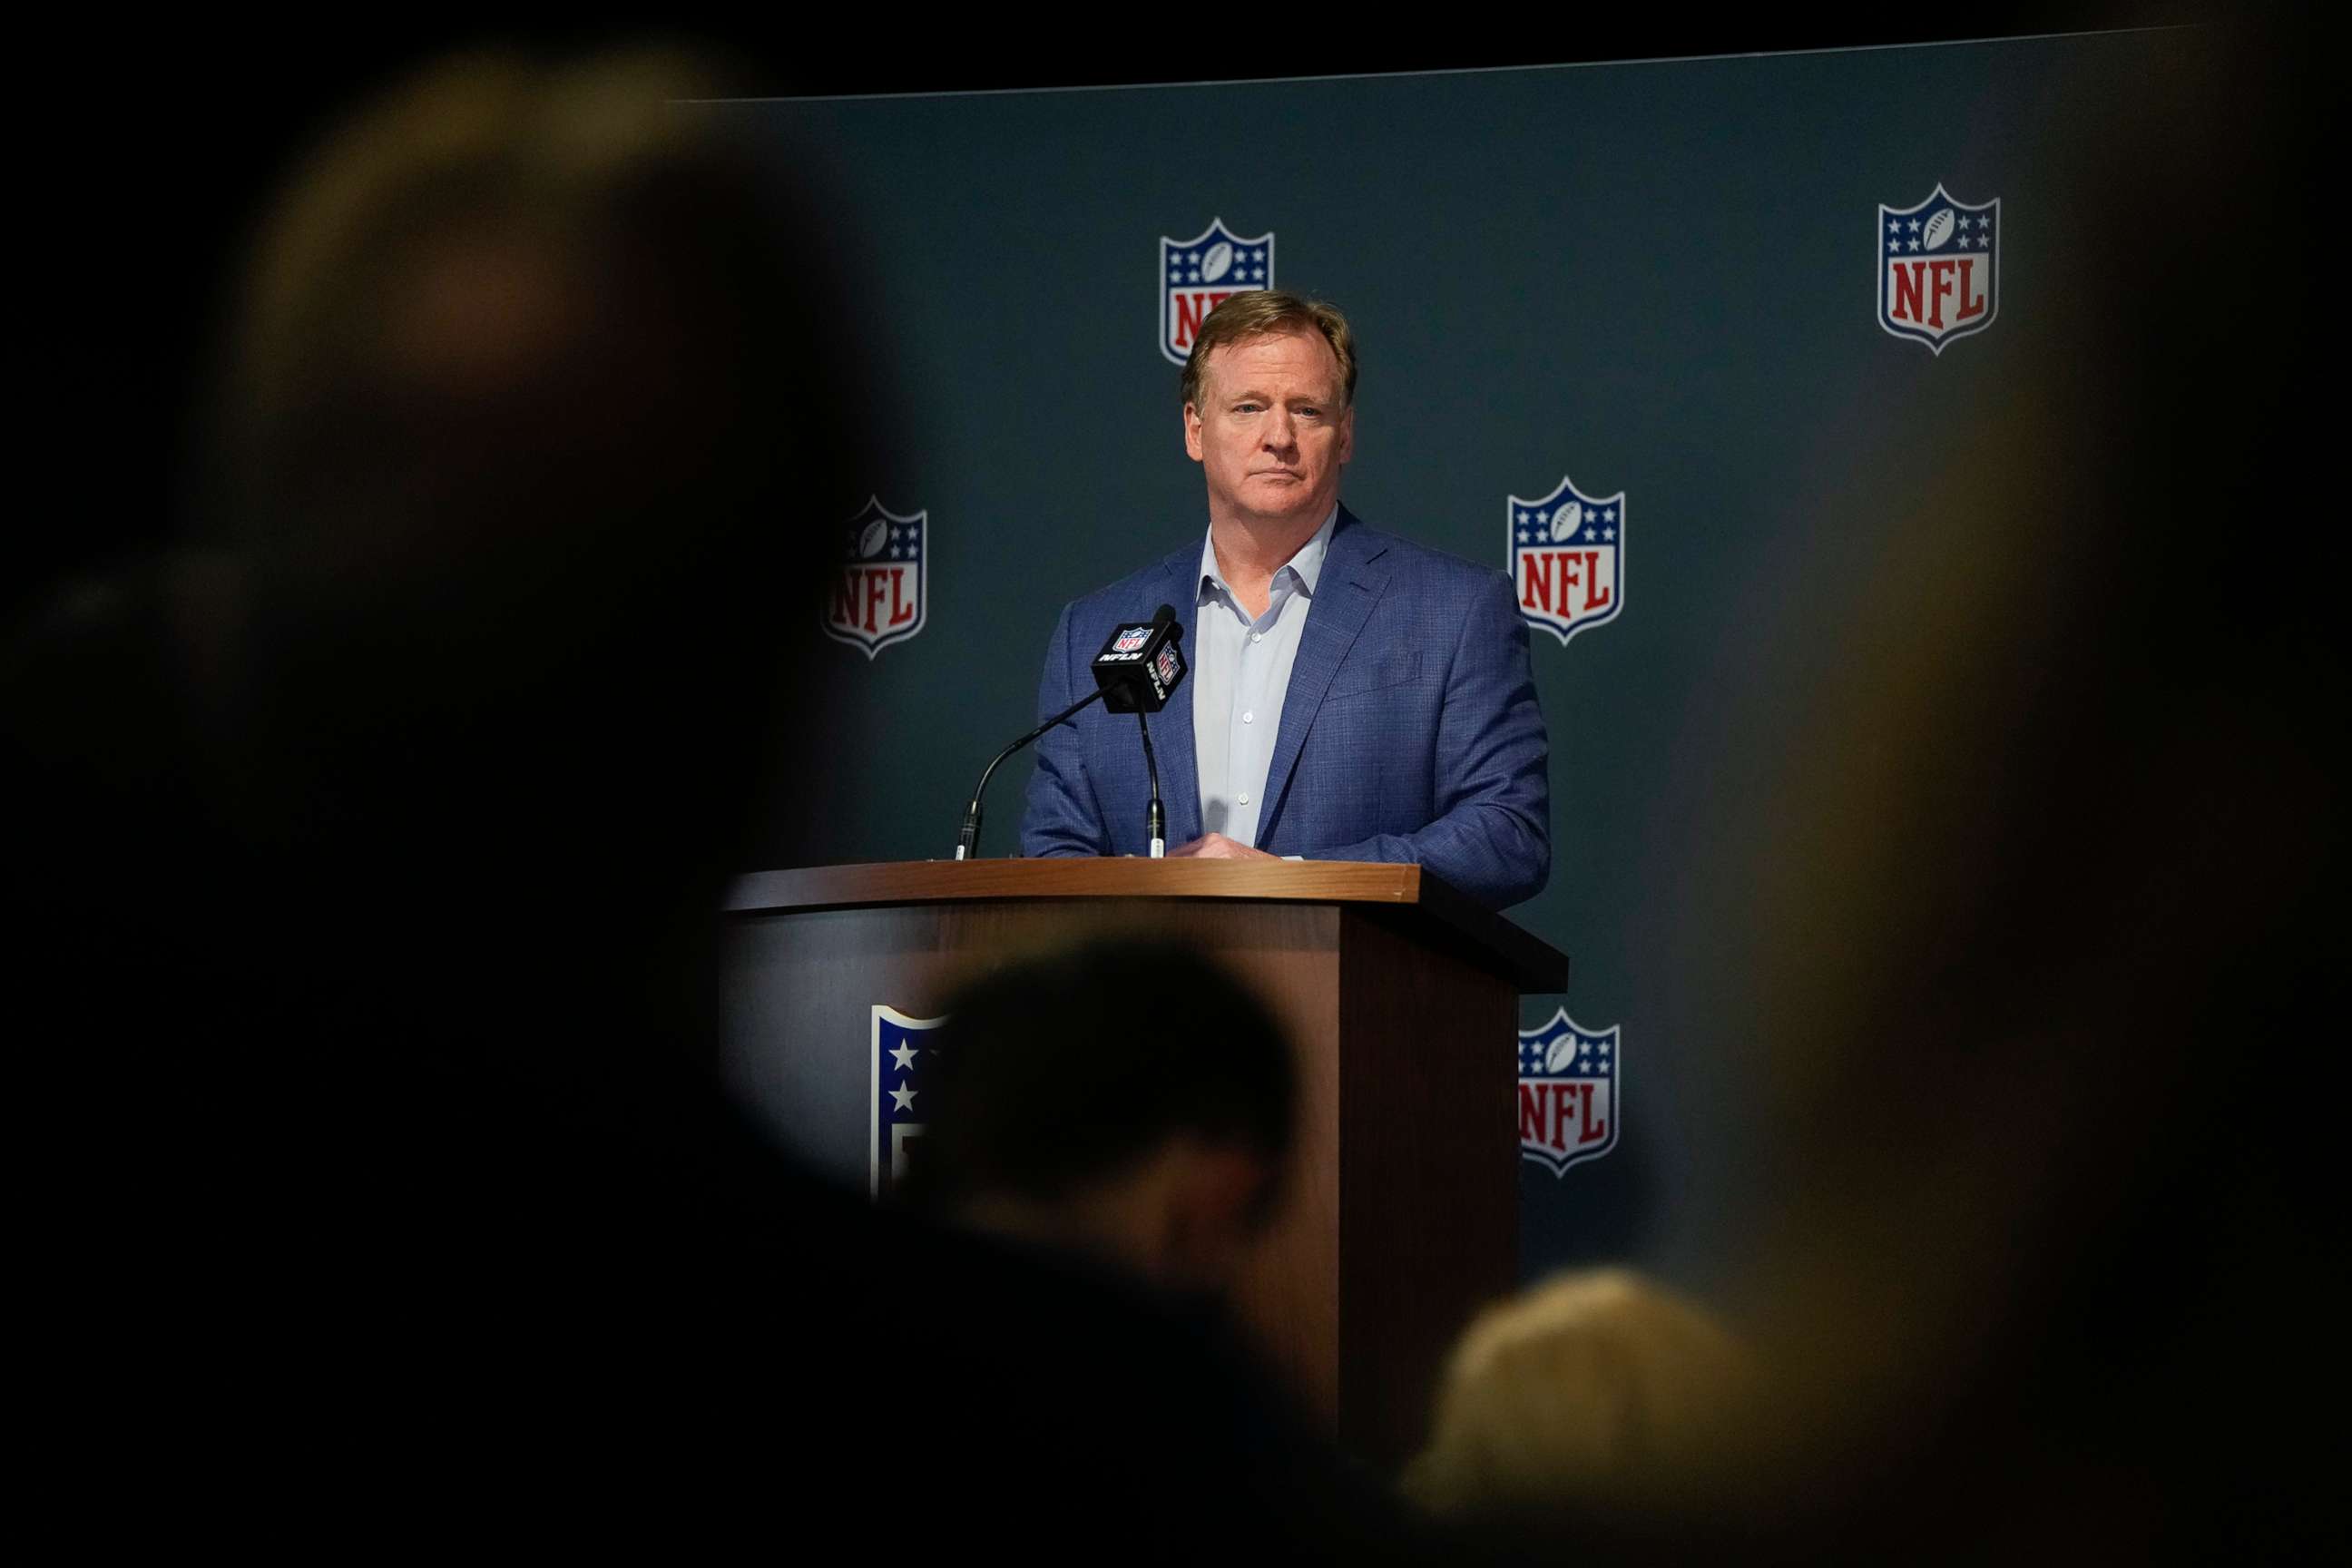 PHOTO: NFL Commissioner Roger Goodell answers questions from reporters at a press conference following the close of the NFL owner's meeting, March 29, 2022, at The Breakers resort in Palm Beach, Fla. 